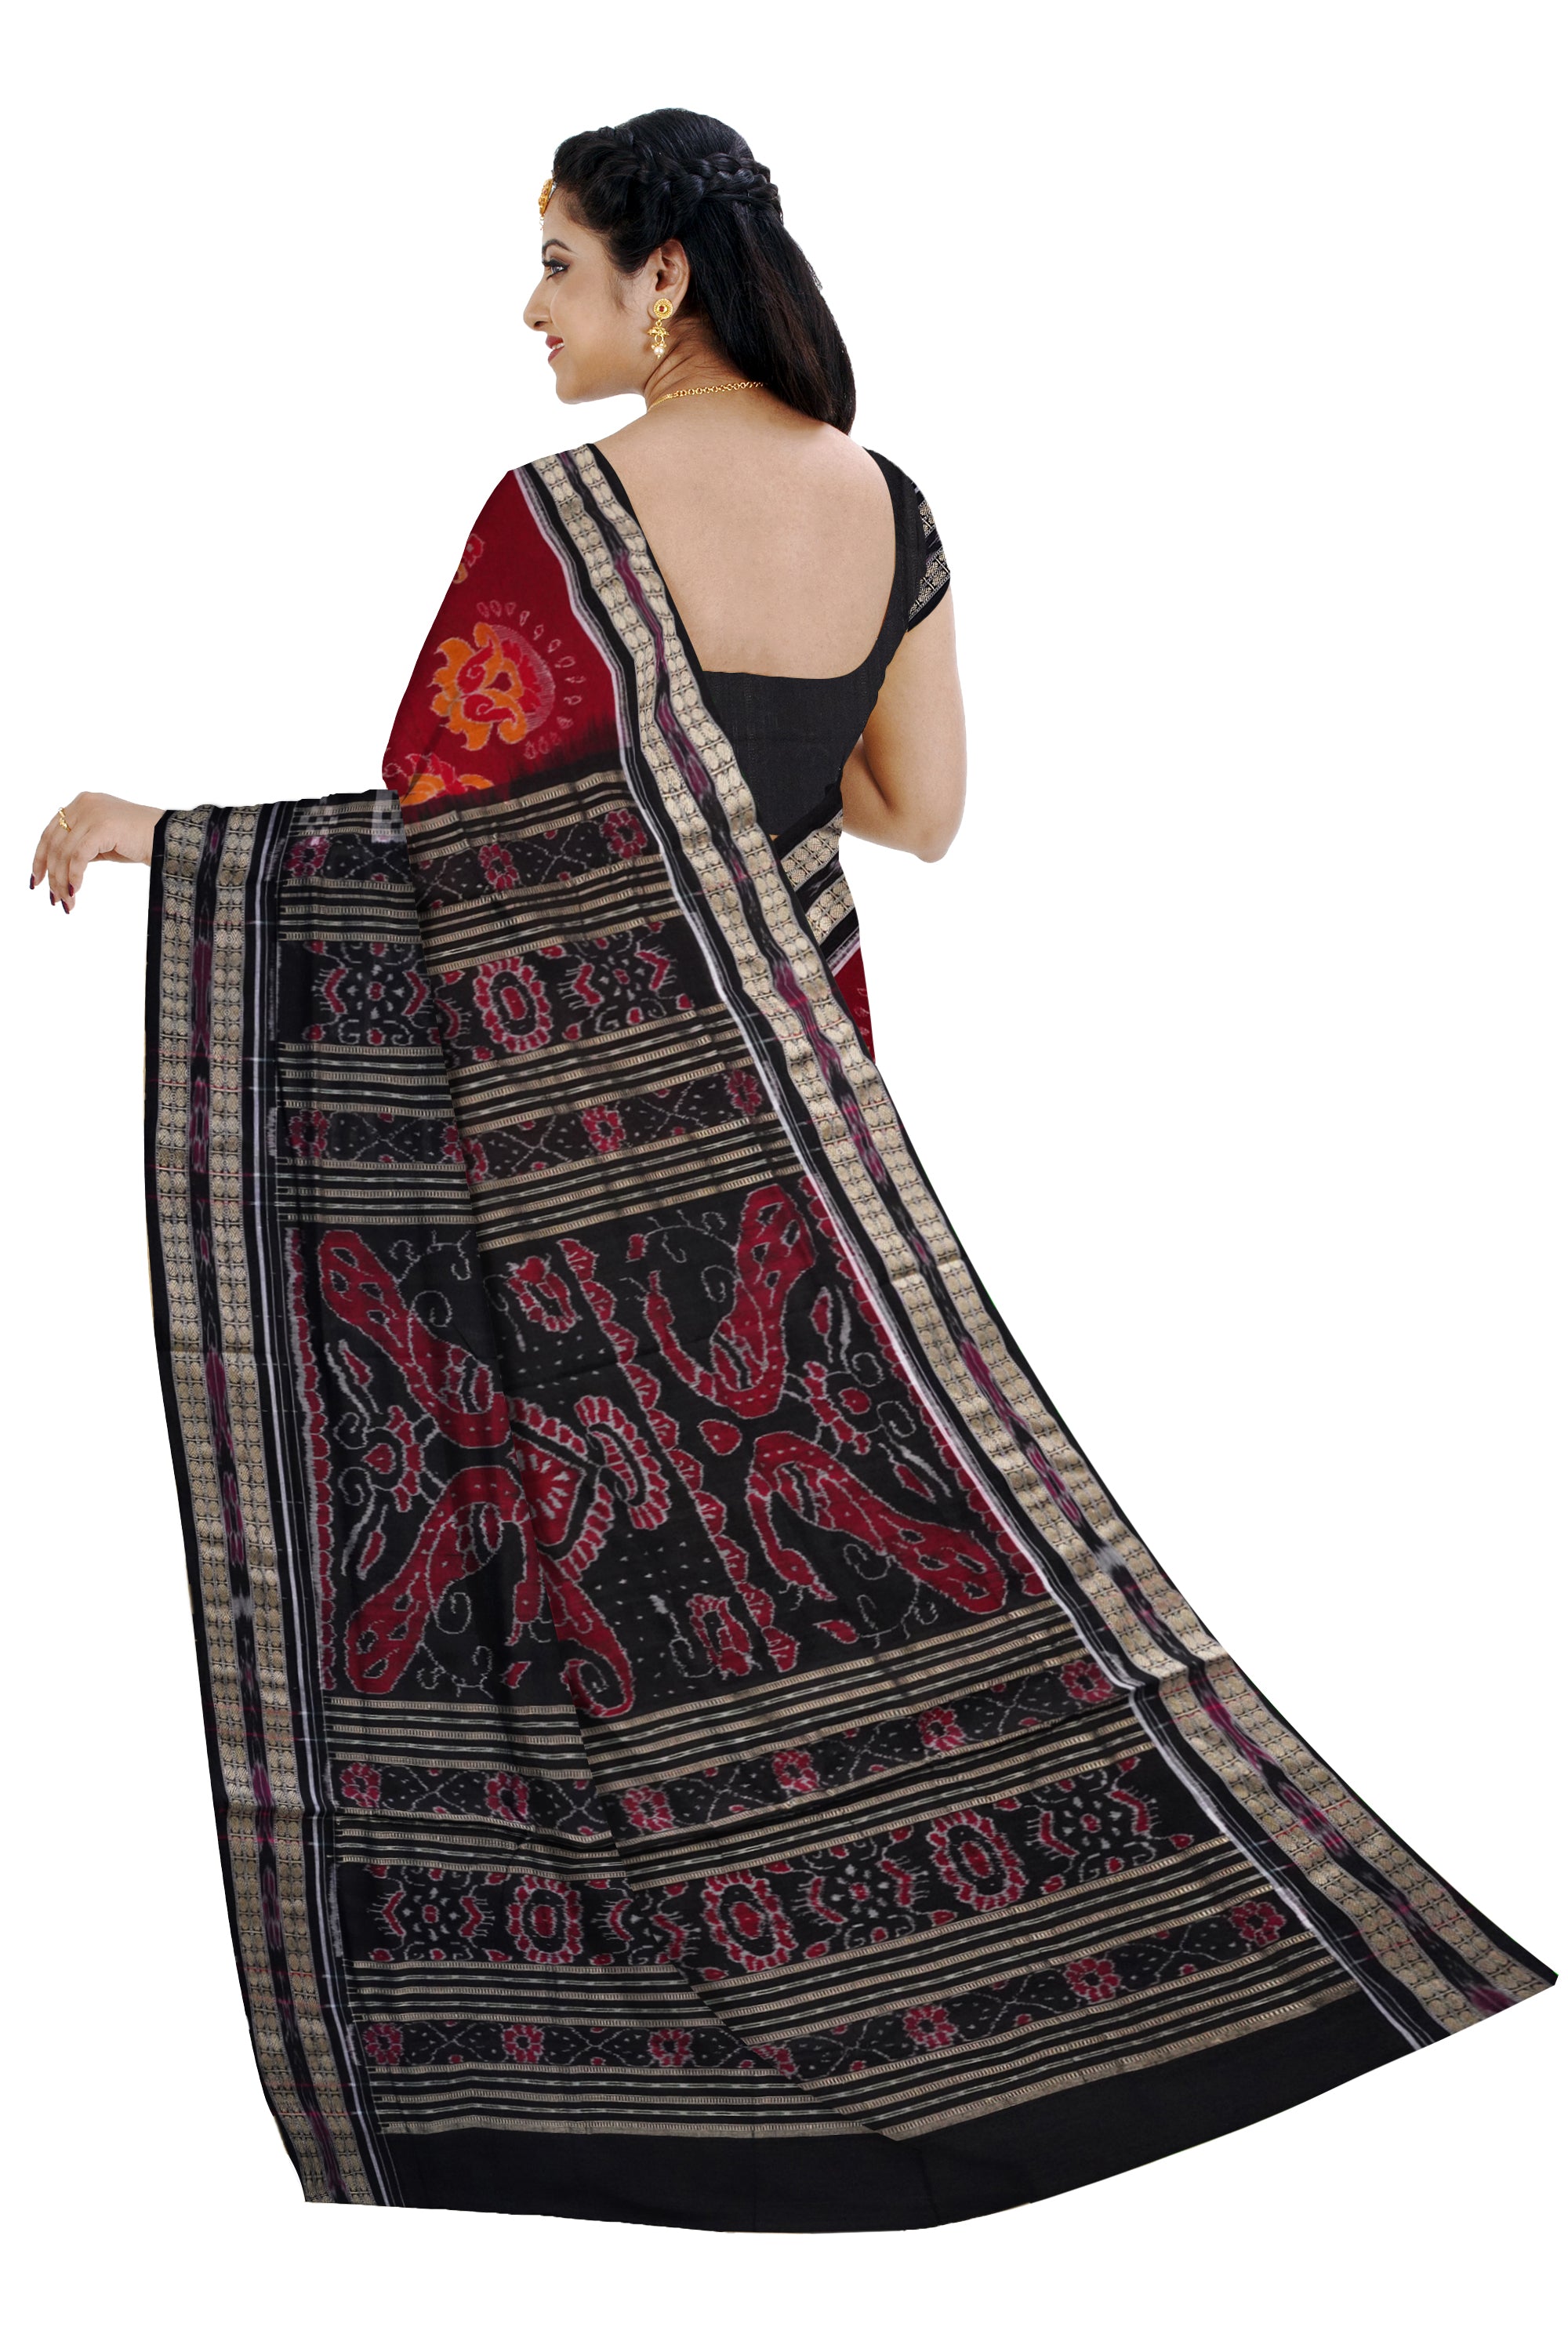 Peacock, Beena , flower and Pasapali work uniquely design on full body in Maroon and Black color. - Koshali Arts & Crafts Enterprise